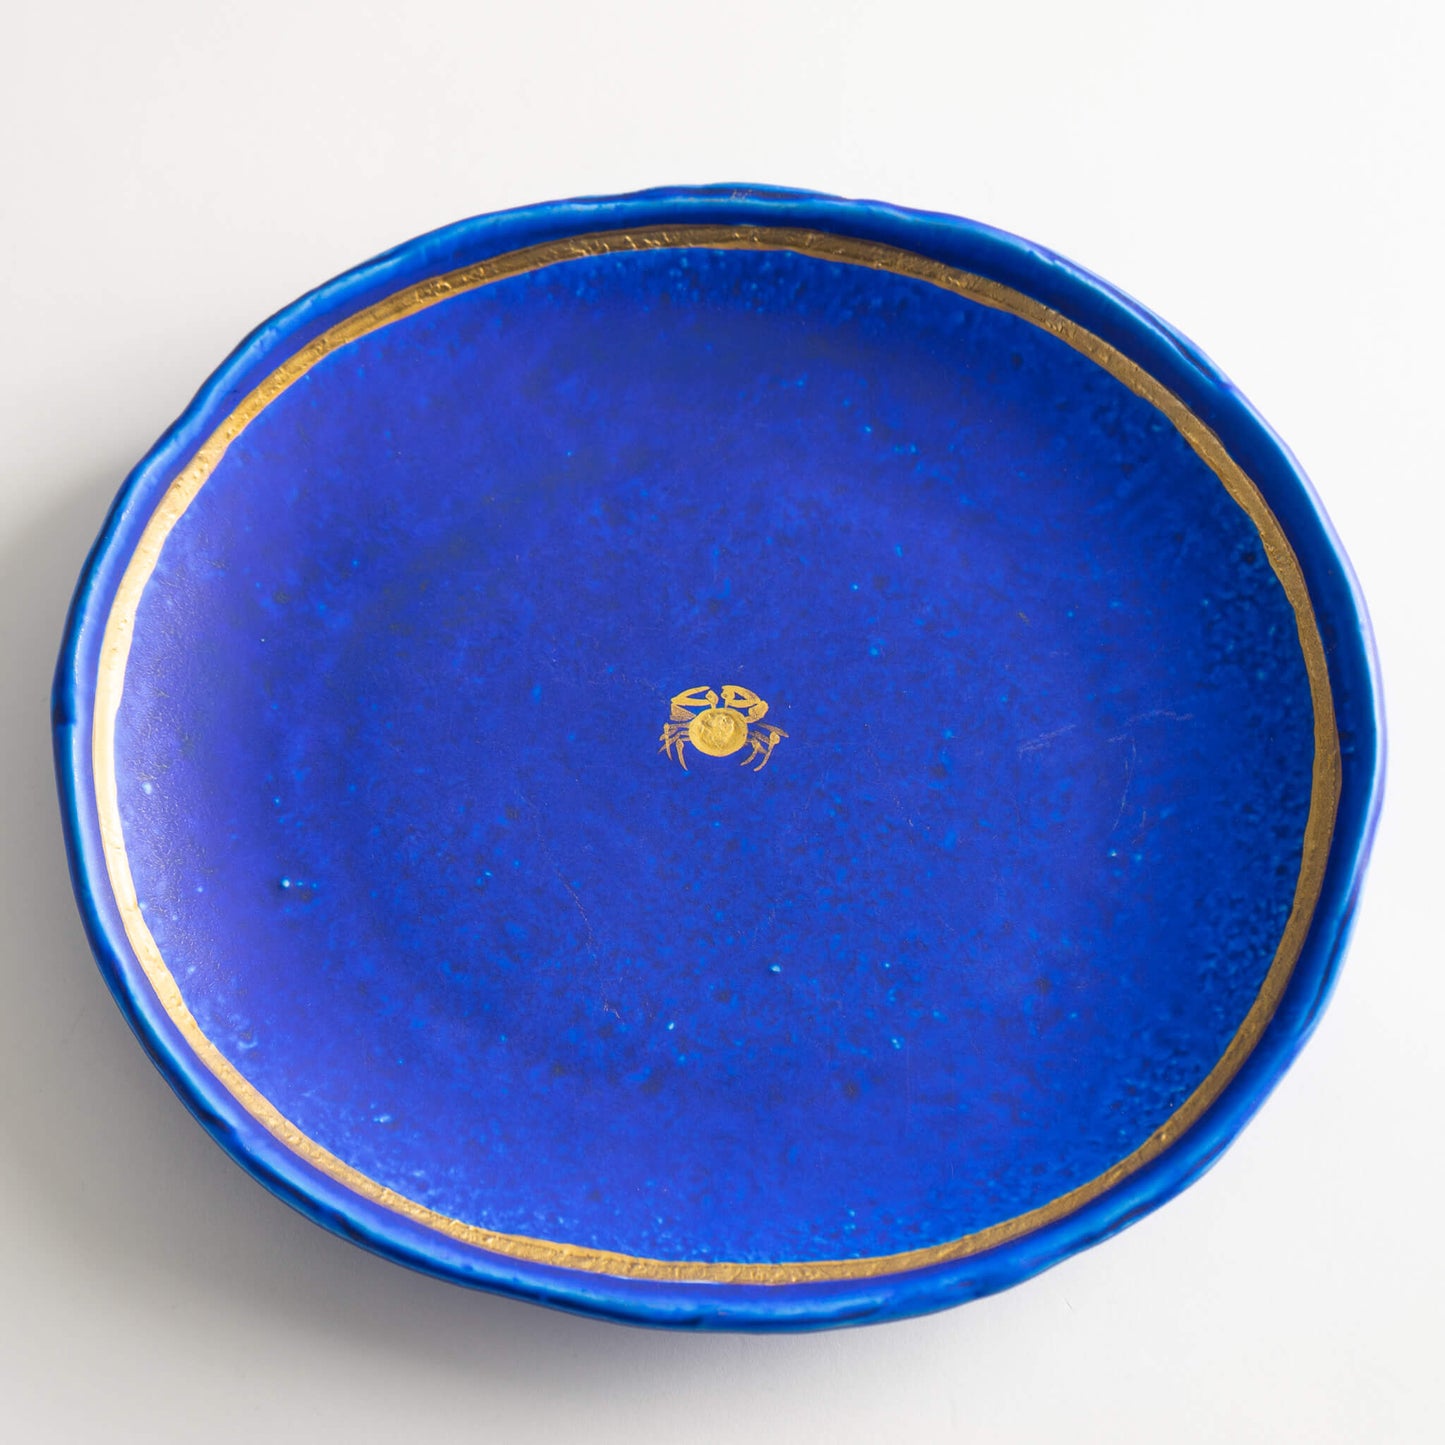 Yves Blue and Gold Jewelry Catchall 